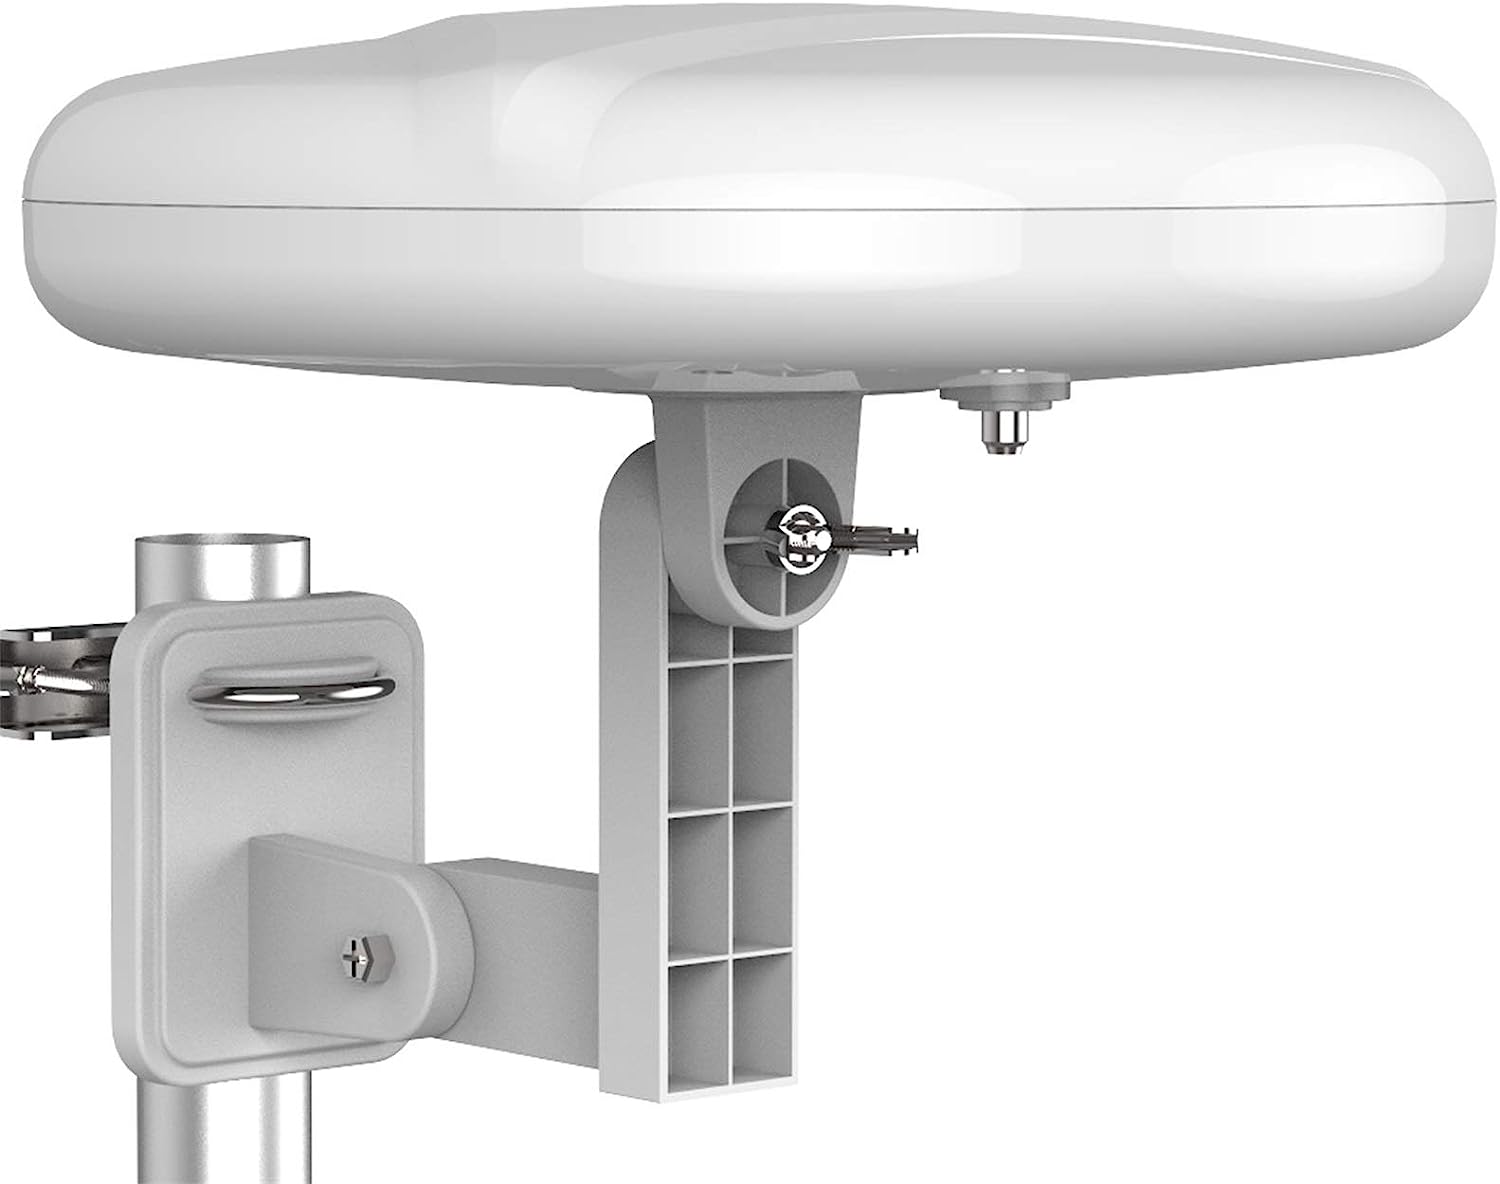 1byone Outdoor TV Antenna 360° Omni-Directional [...]